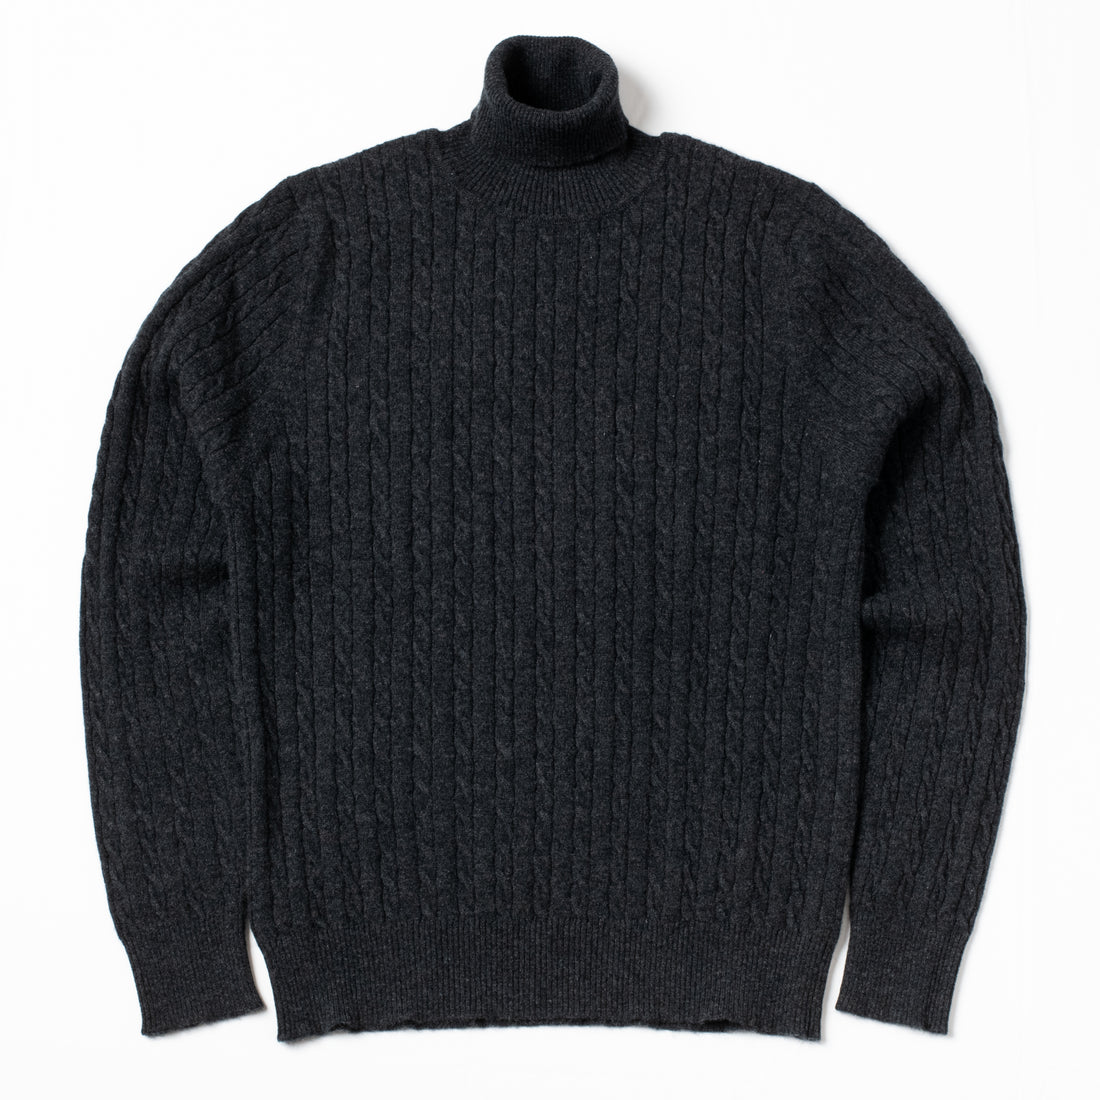 Bryceland's Cable-Knit Rollneck Pullover Charcoal